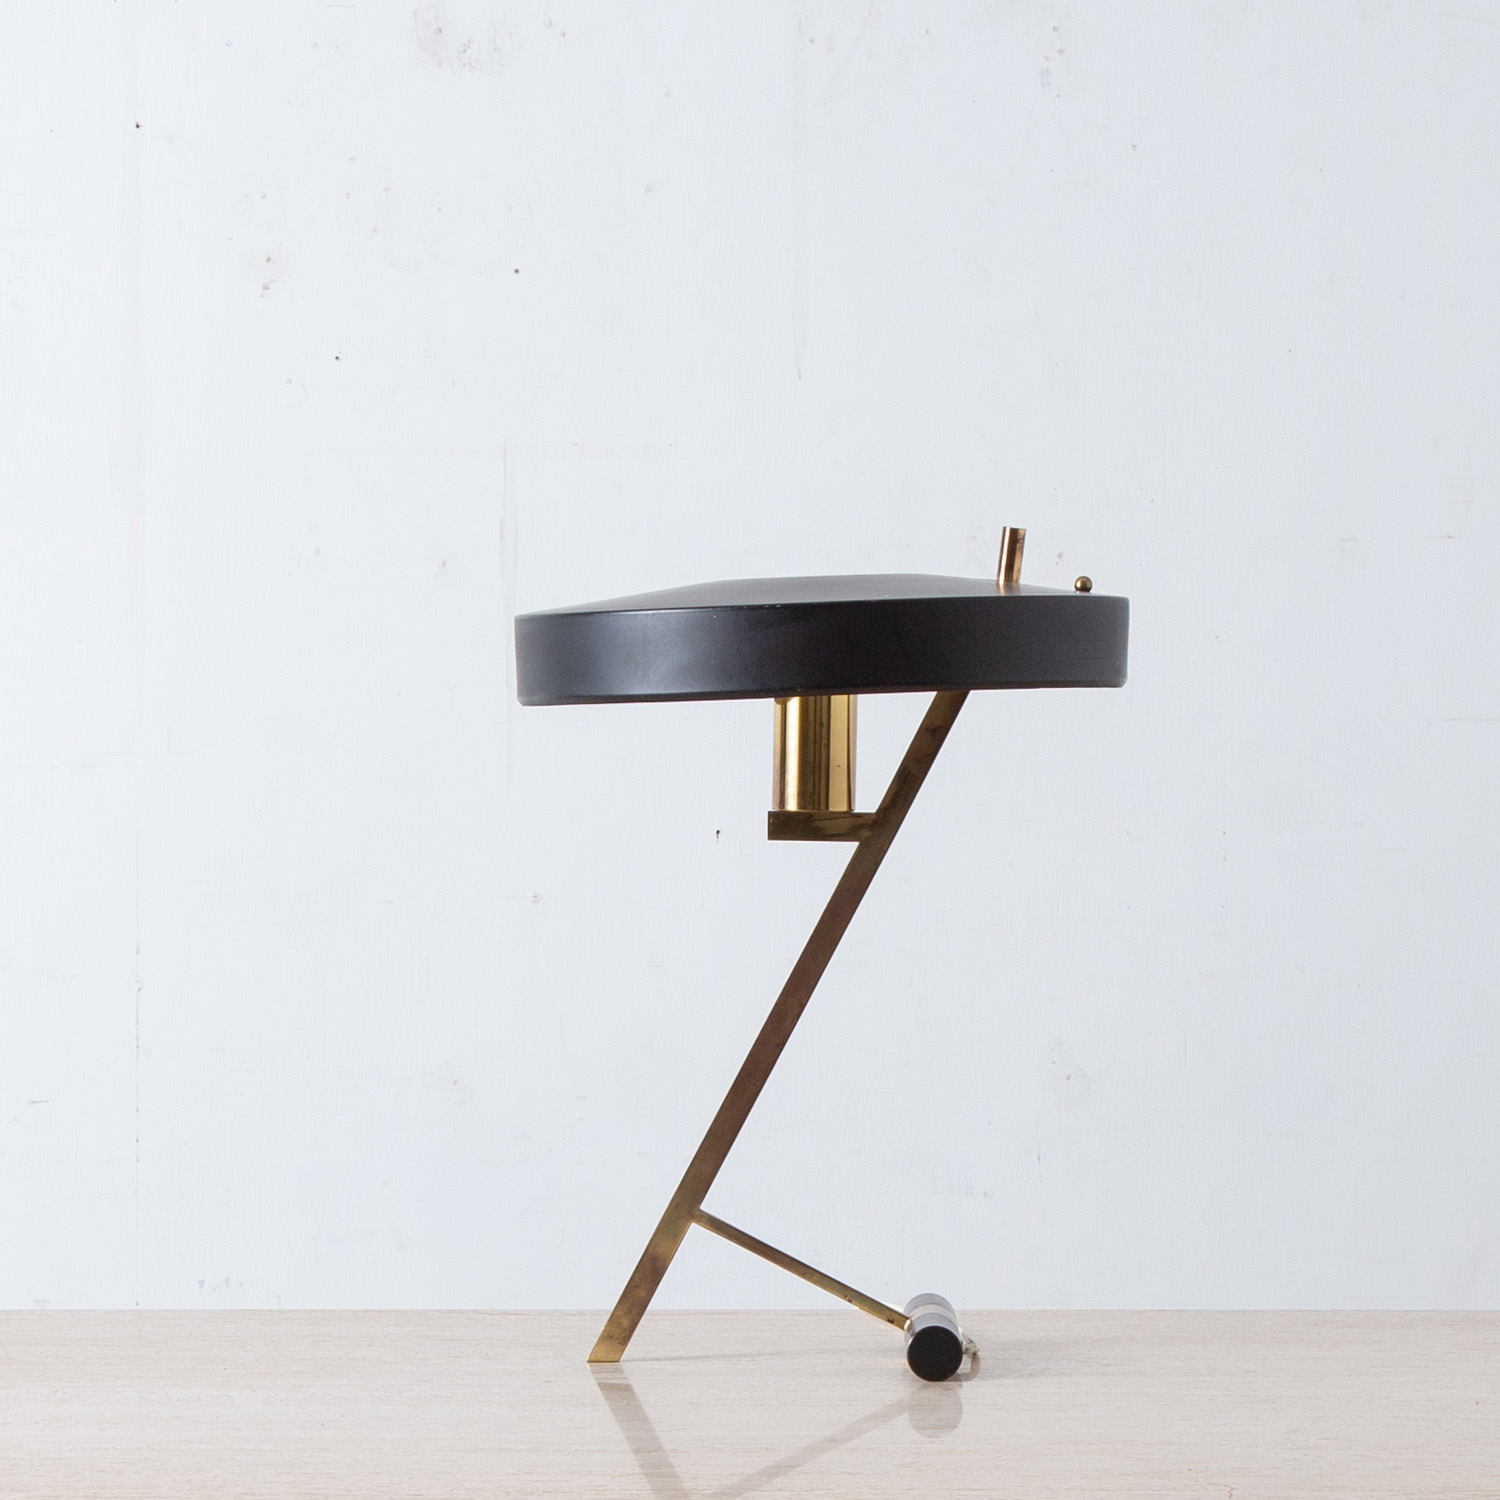 ‘Z model’ Desk Lamp by Louis Kalff for Philips in Brass and Black Metal